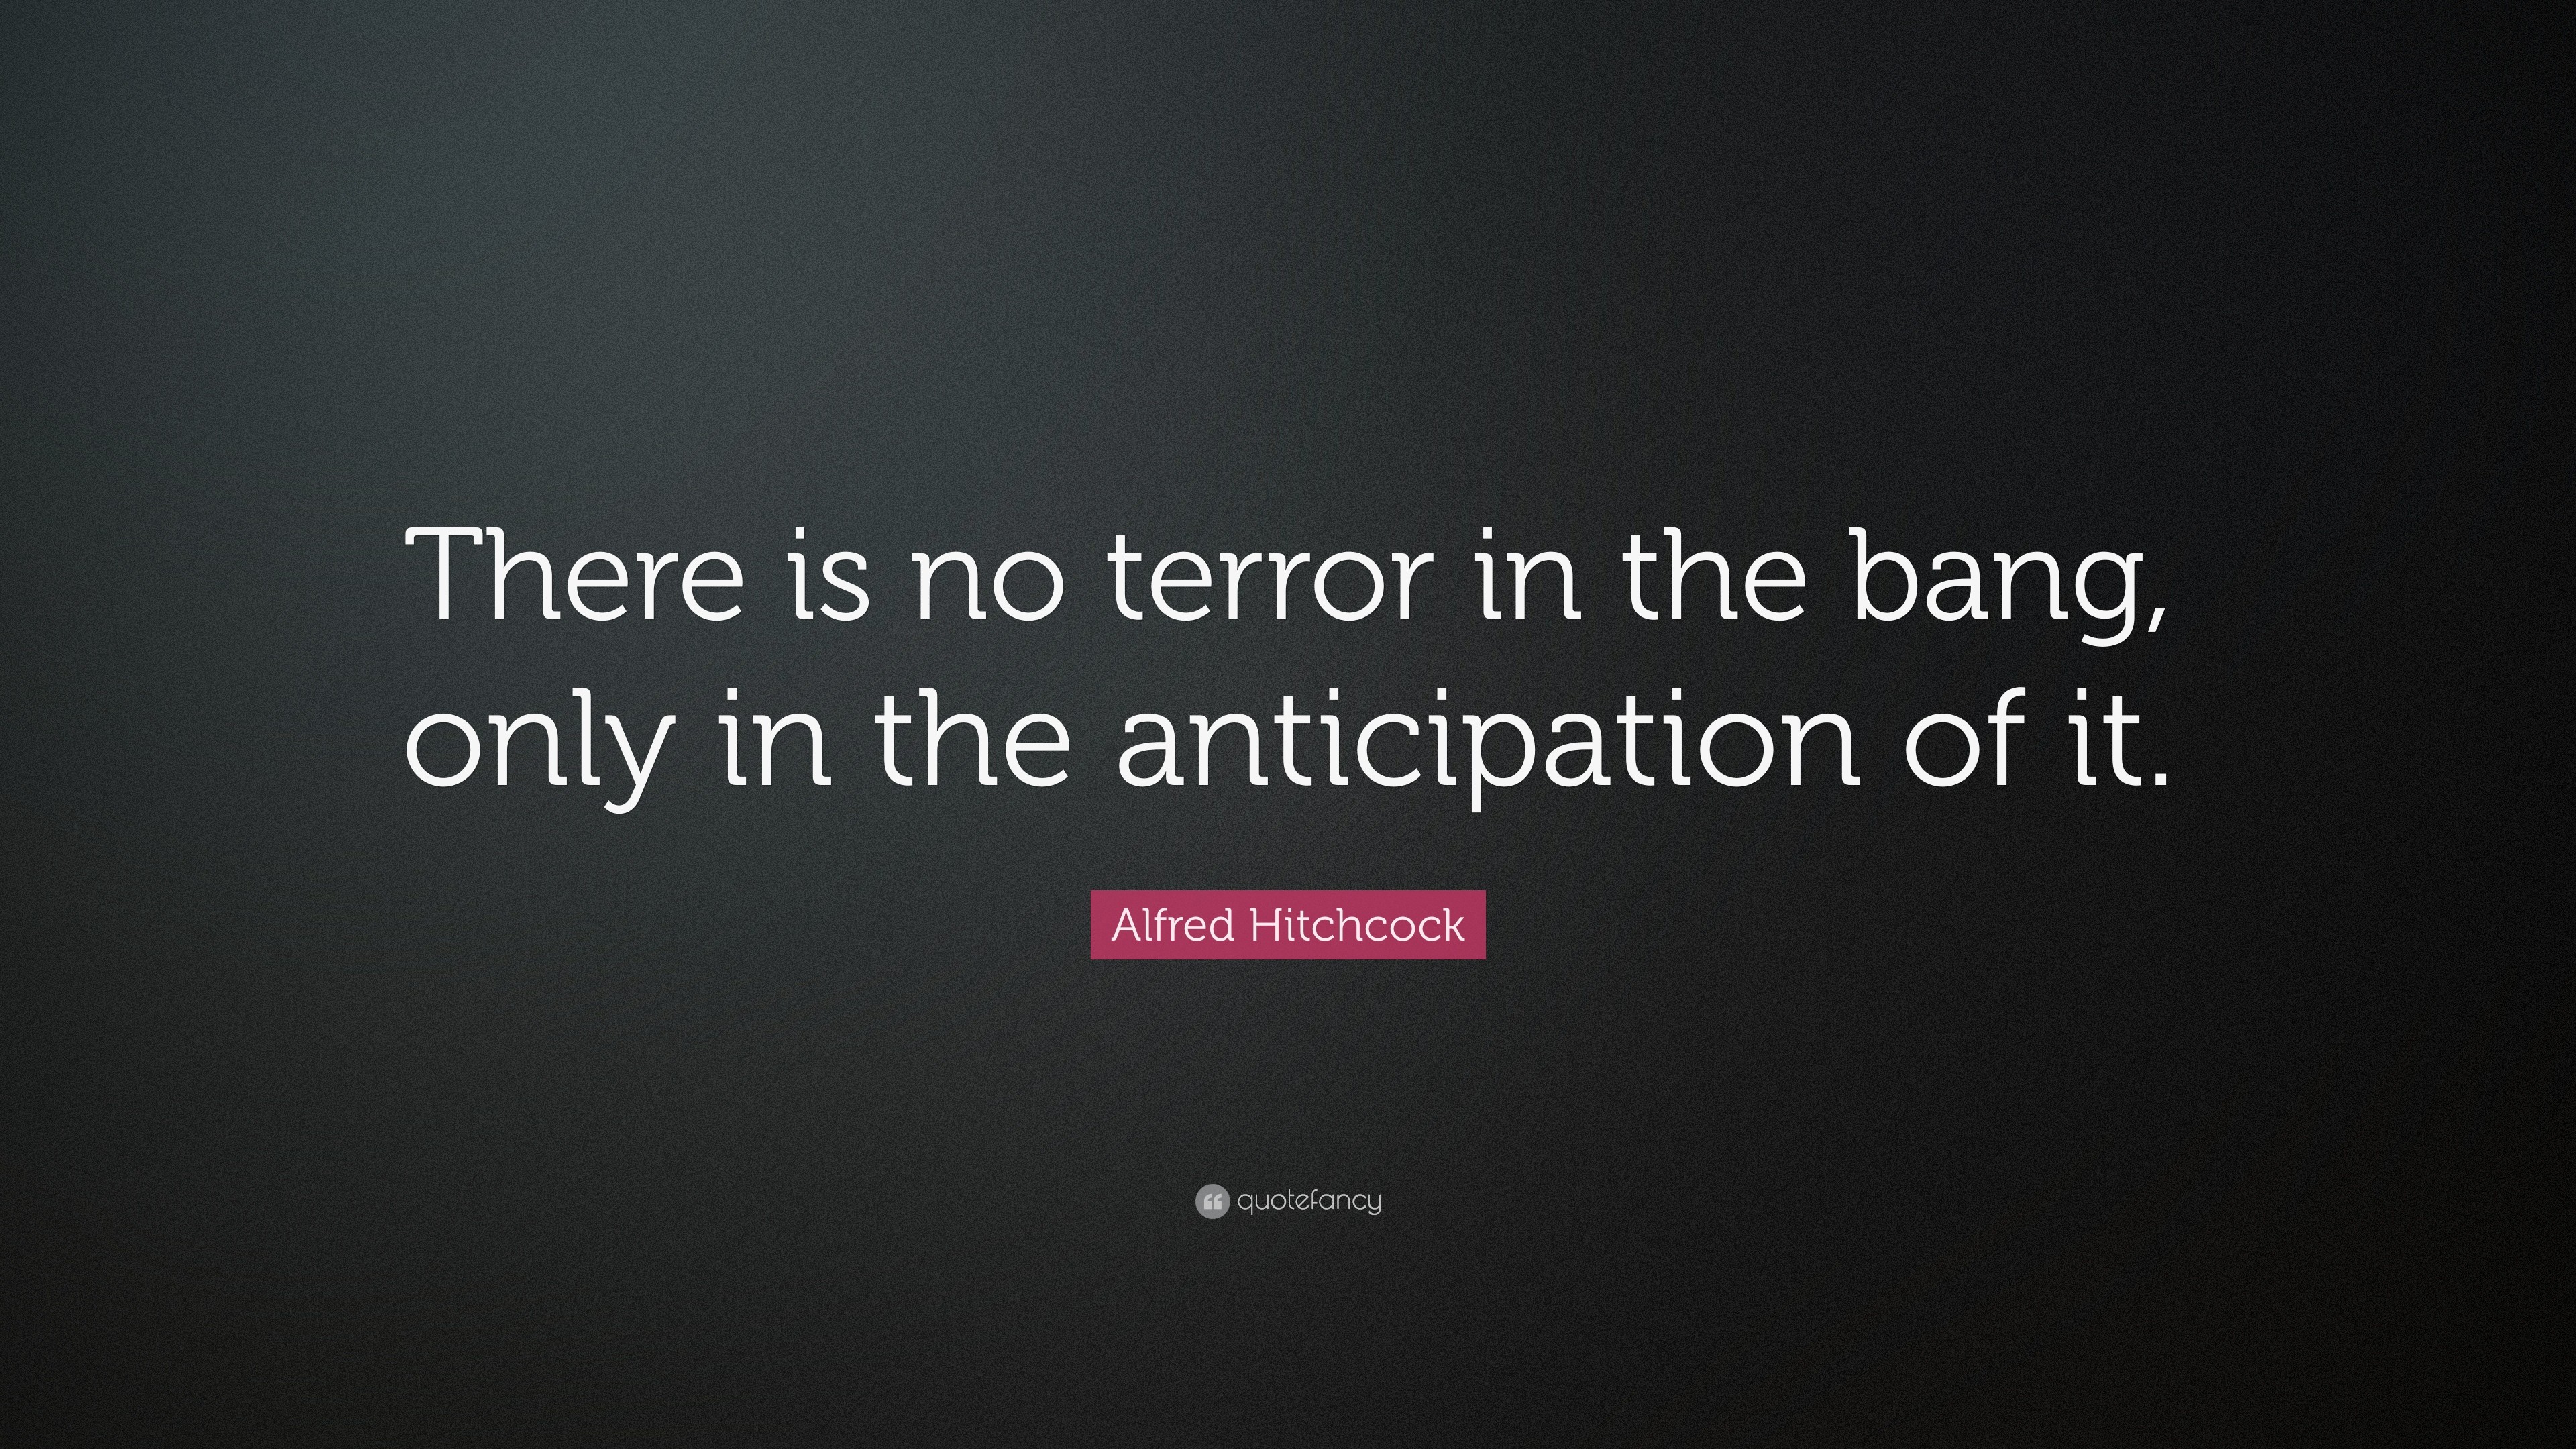 3840x2160 Alfred Hitchcock Quote: “There is no terror in the bang, only in the